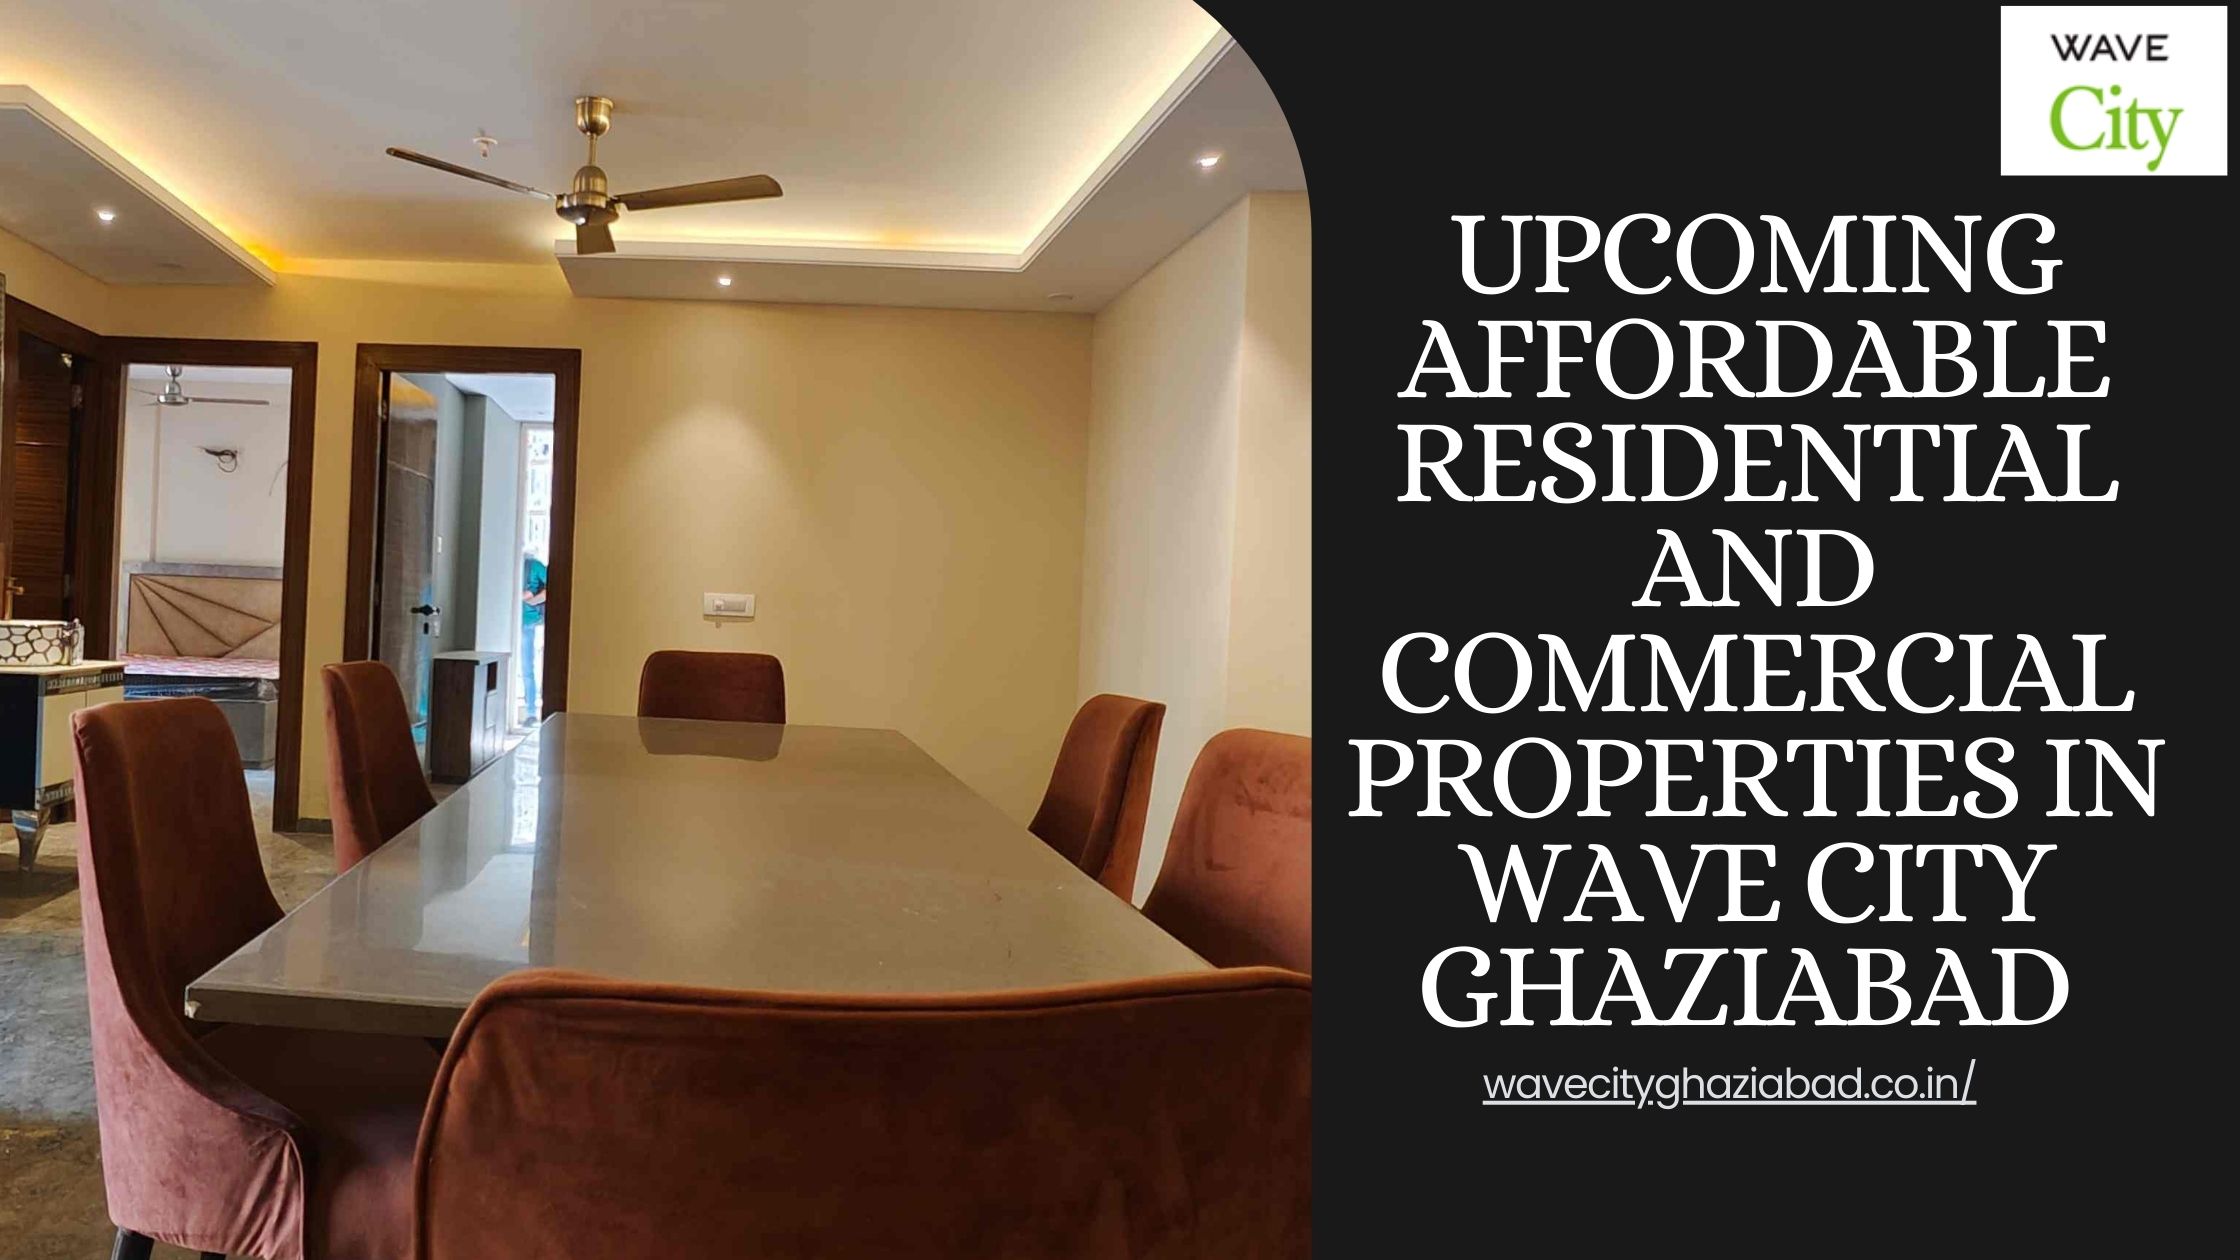 Upcoming Affordable Residential And Commercial Properties In Wave City Ghaziabad - Articles Webhunk